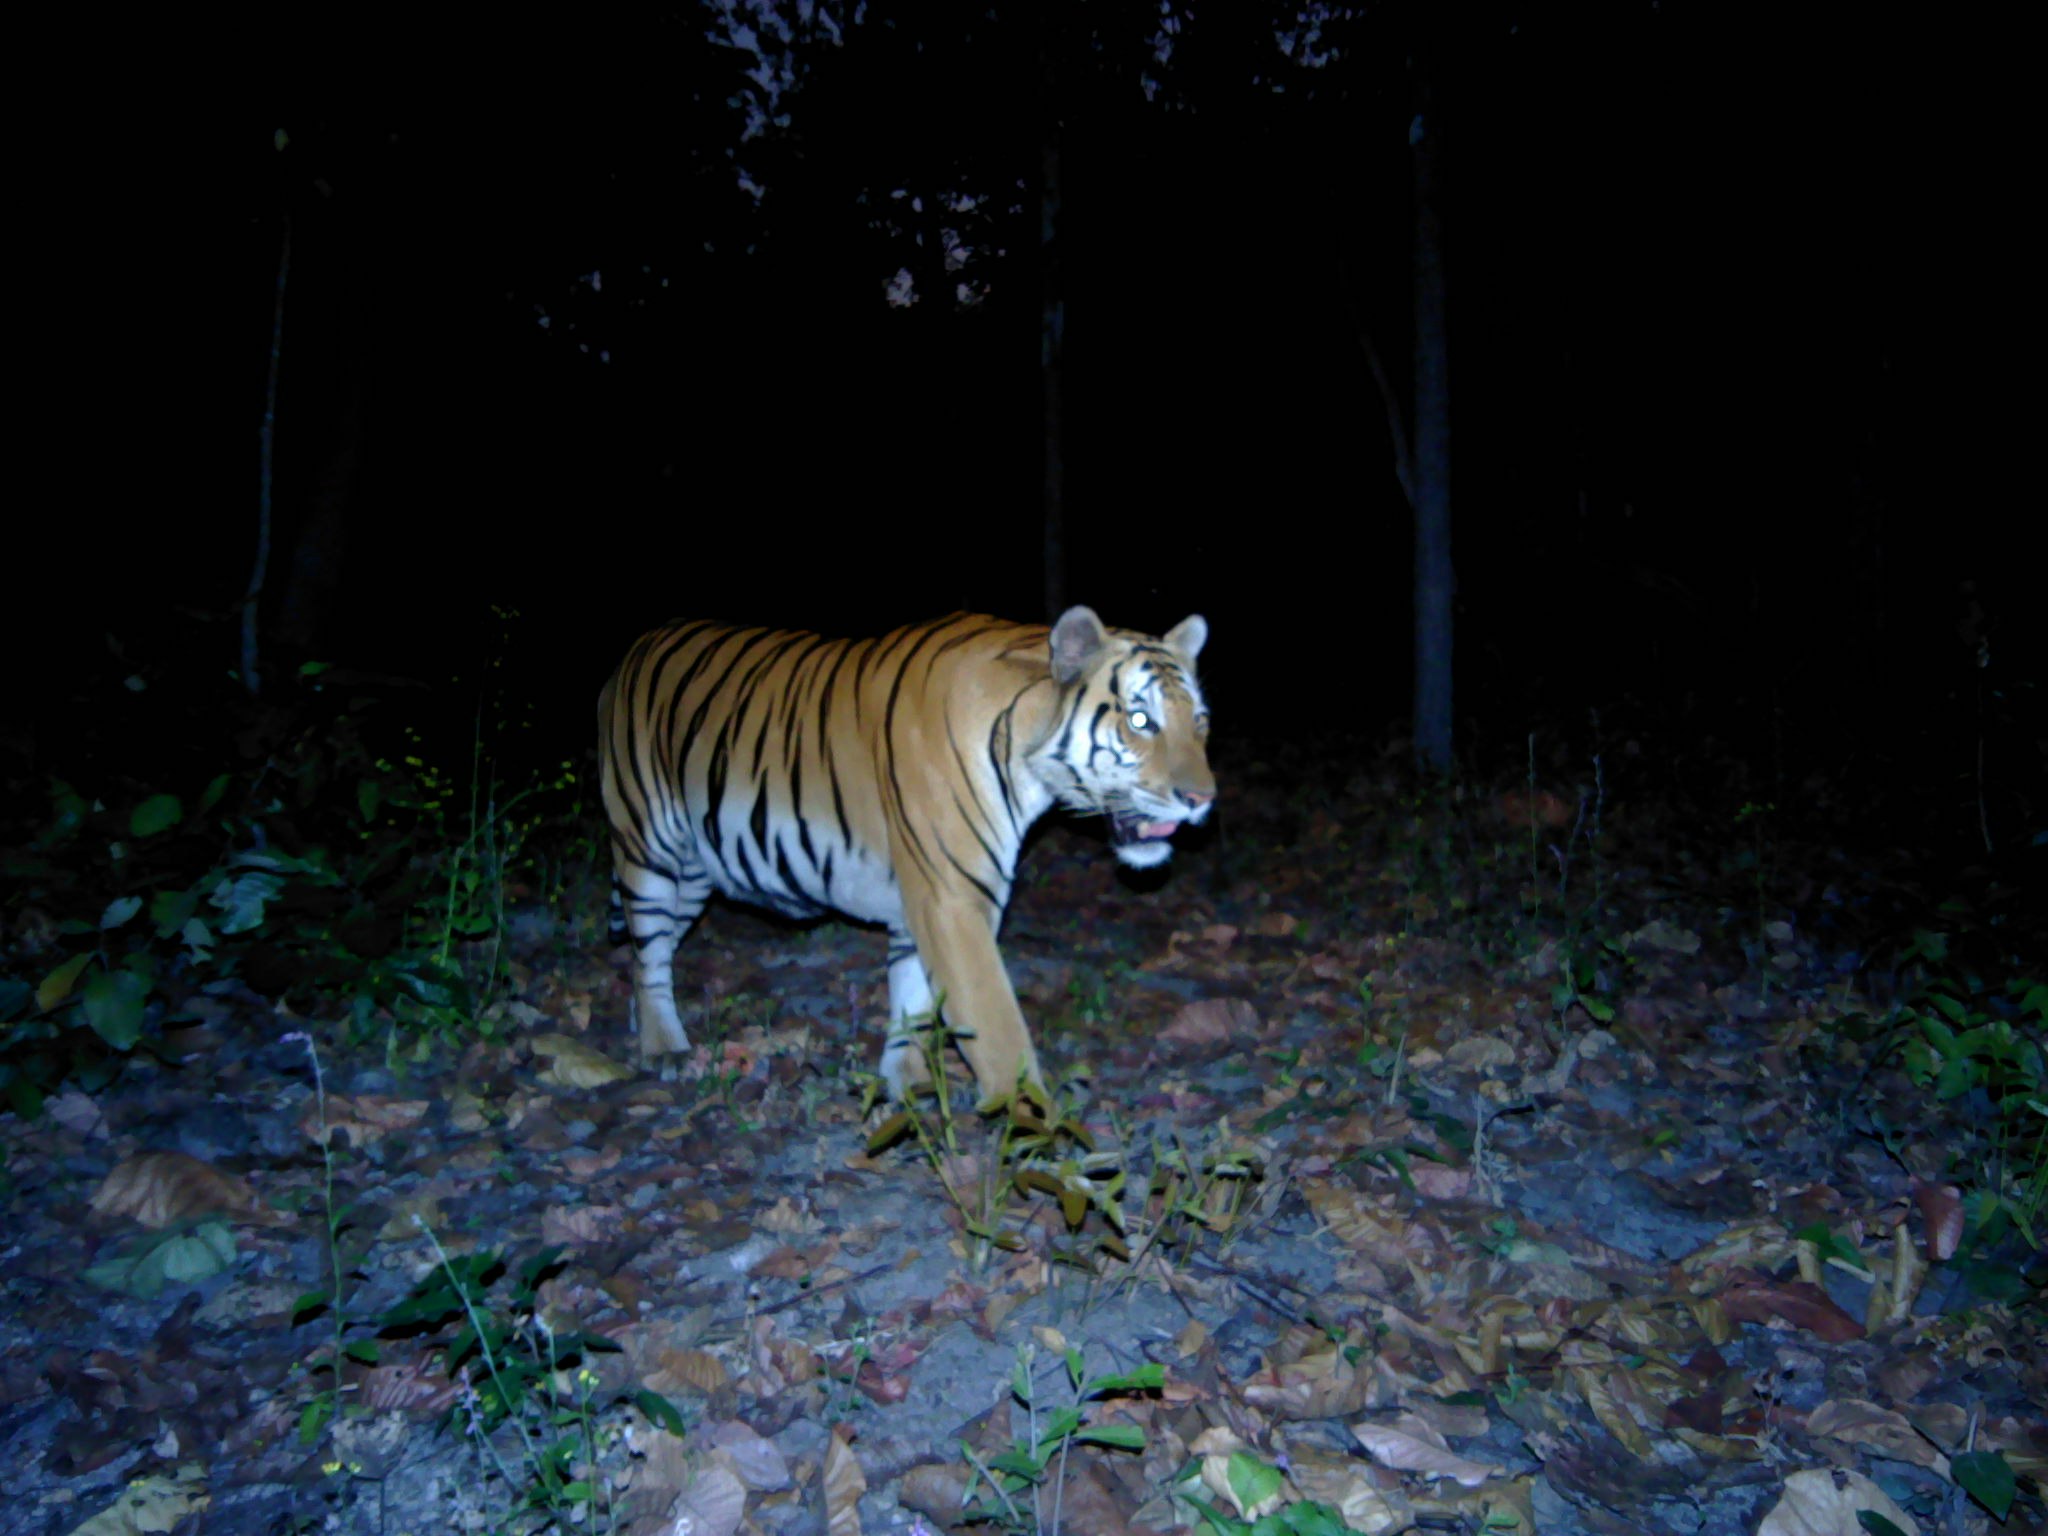 An endangered tiger in western Thailand, captured on camera at night